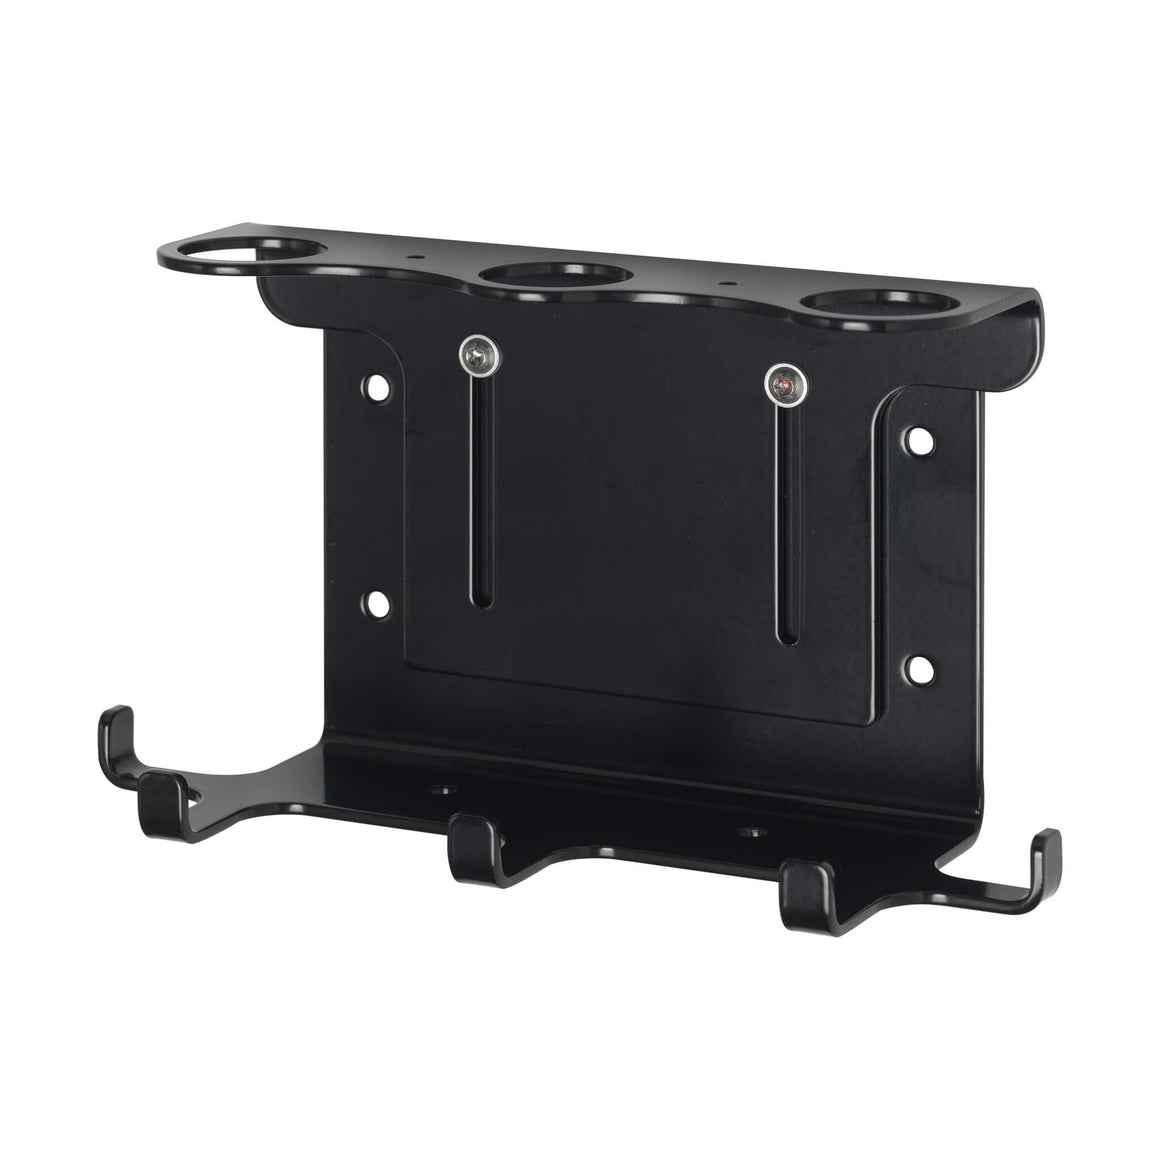 Triple 300ml Security Wall-Mounted Holder - Satin Black